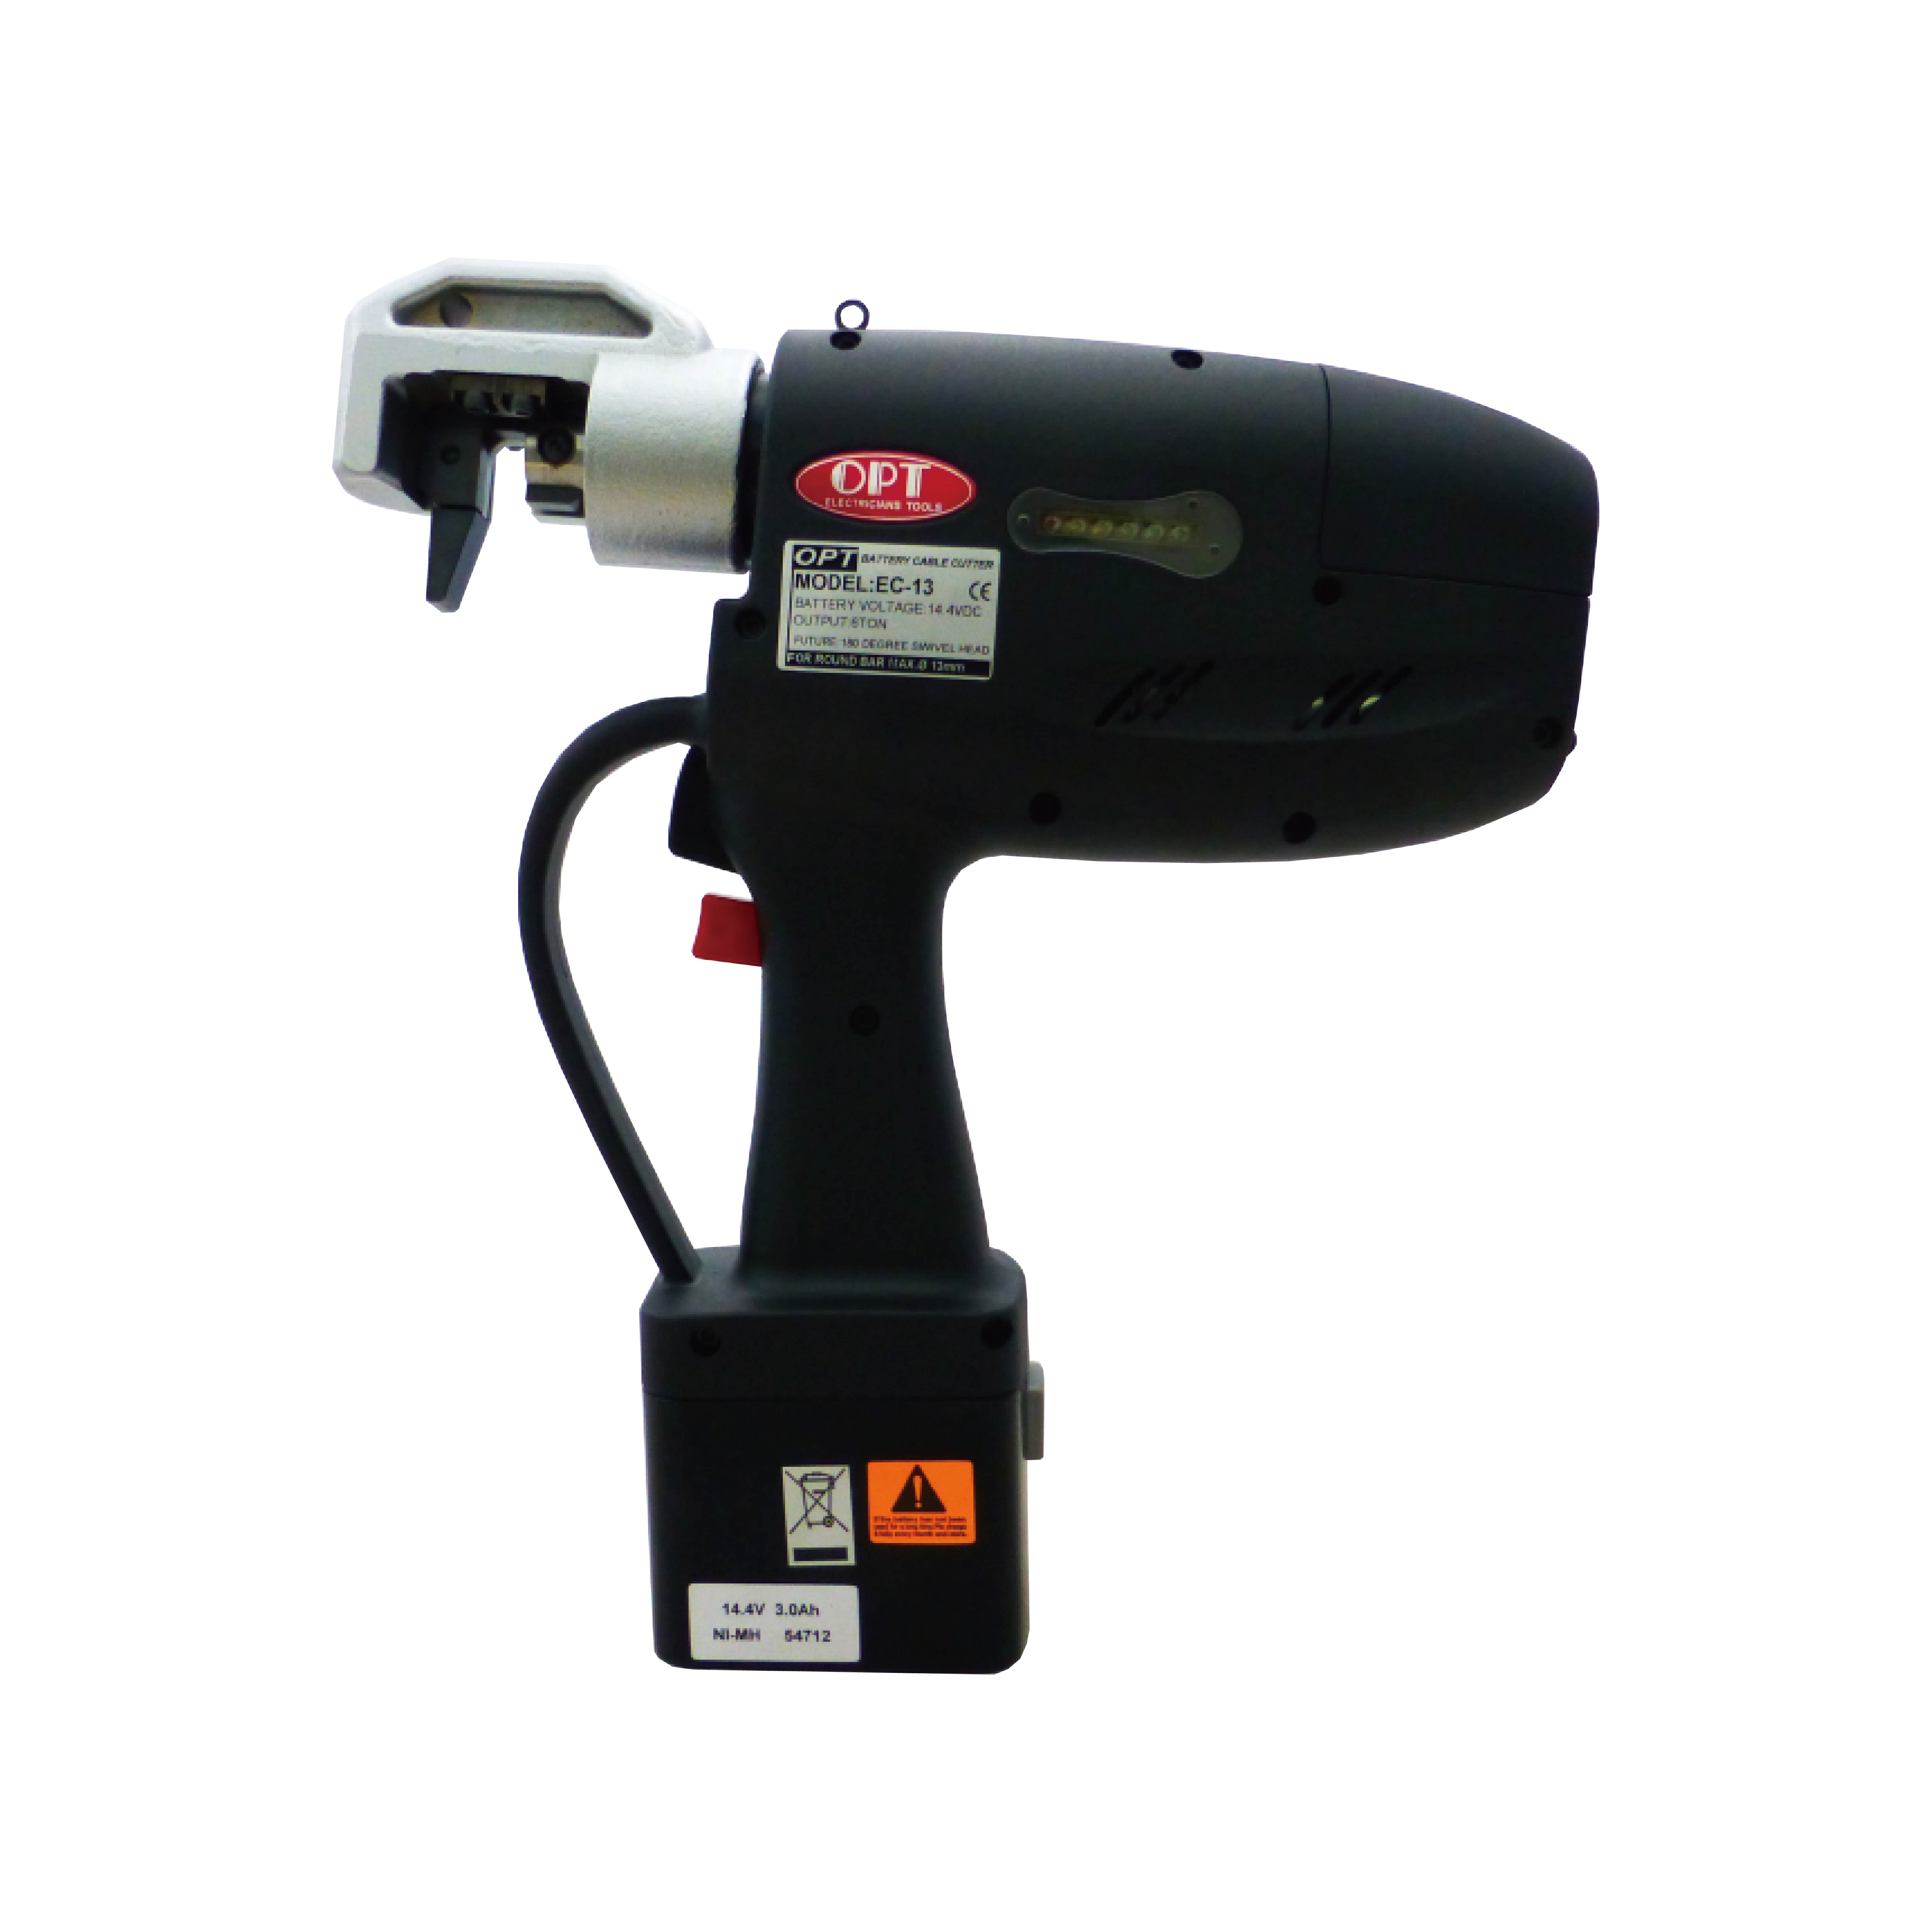 ECL-13 CORDLESS HYDRAULIC CABLE CUTTERS-ECL-13